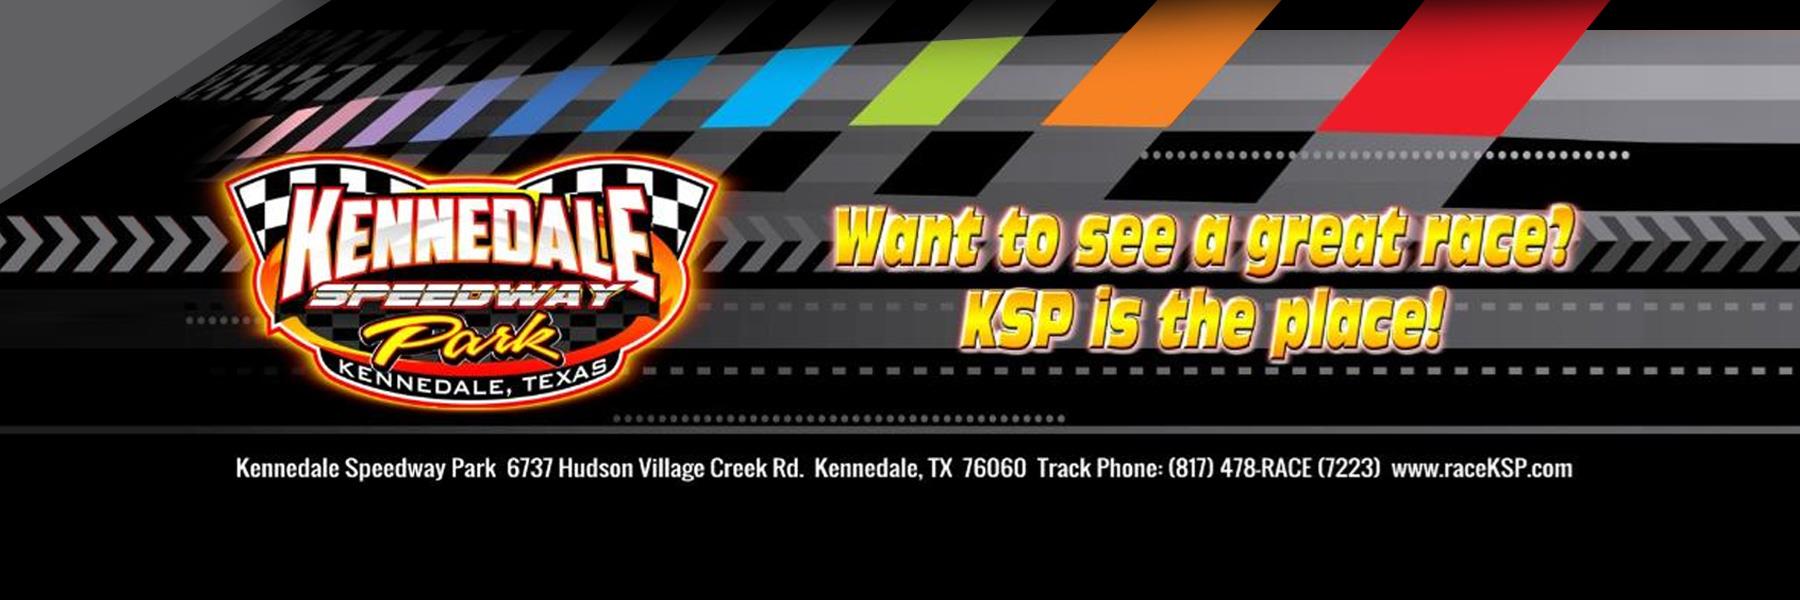 5/21/2022 - Kennedale Speedway Park